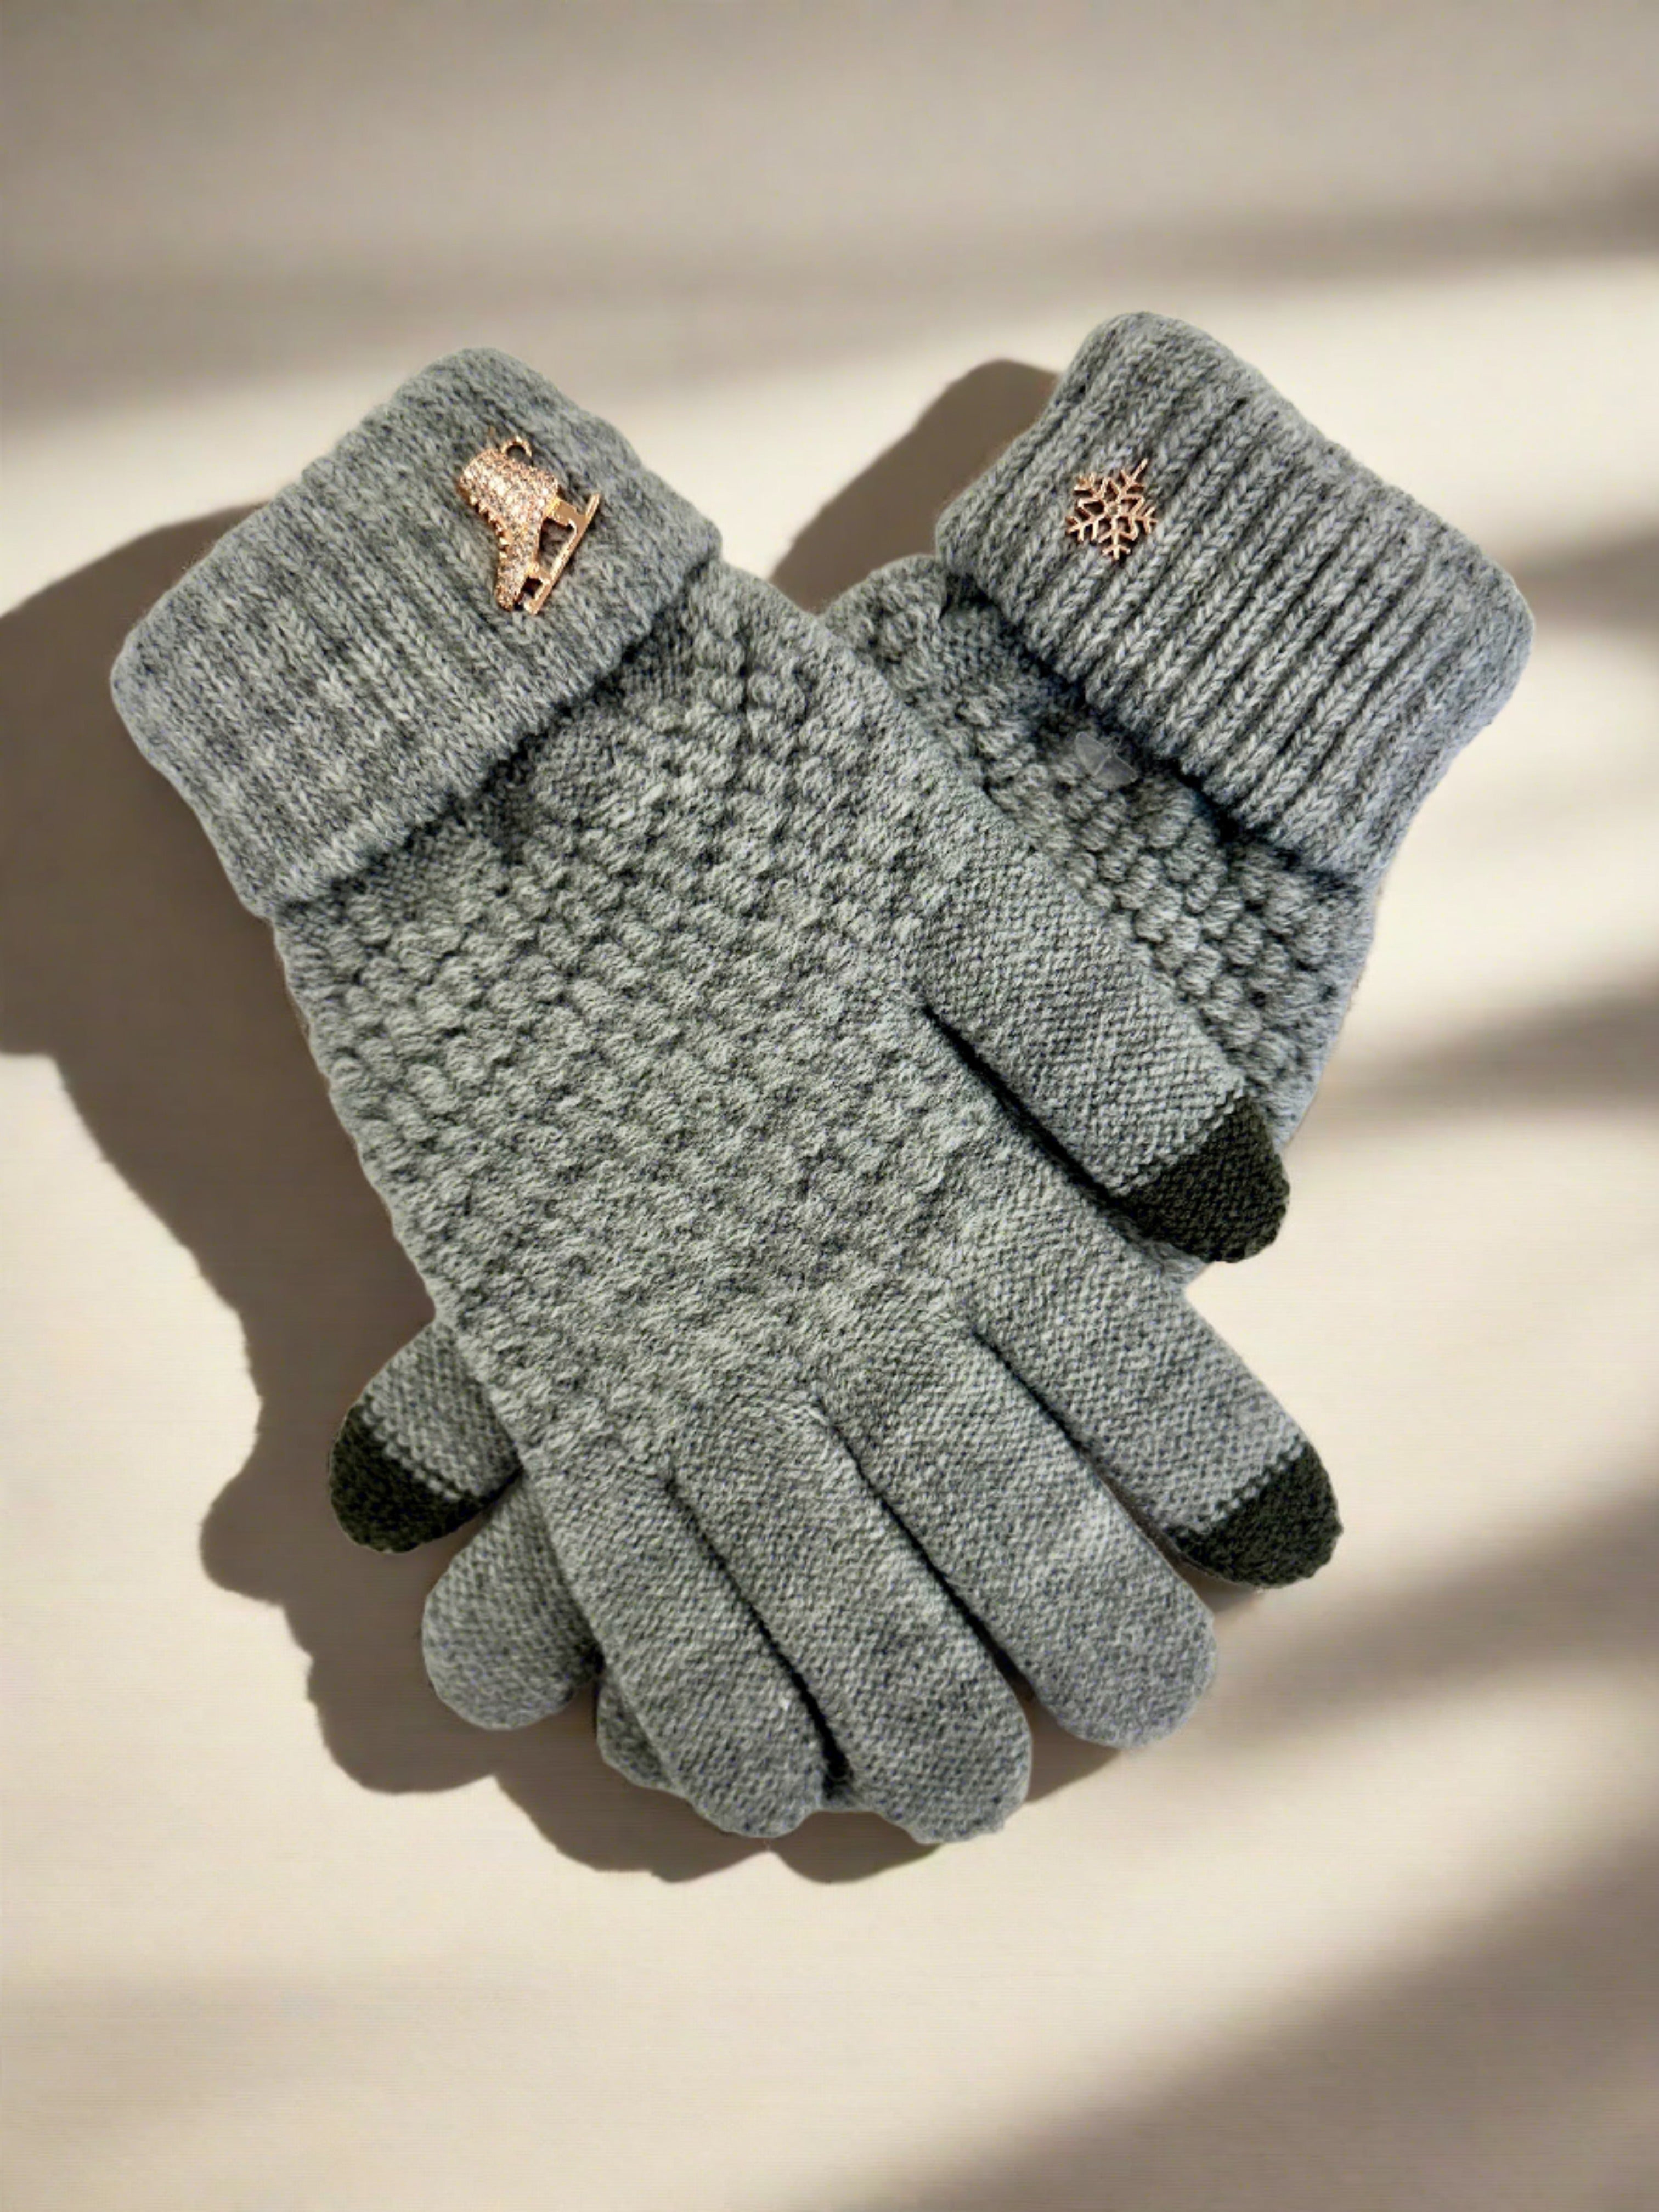 The Gliding Gloves